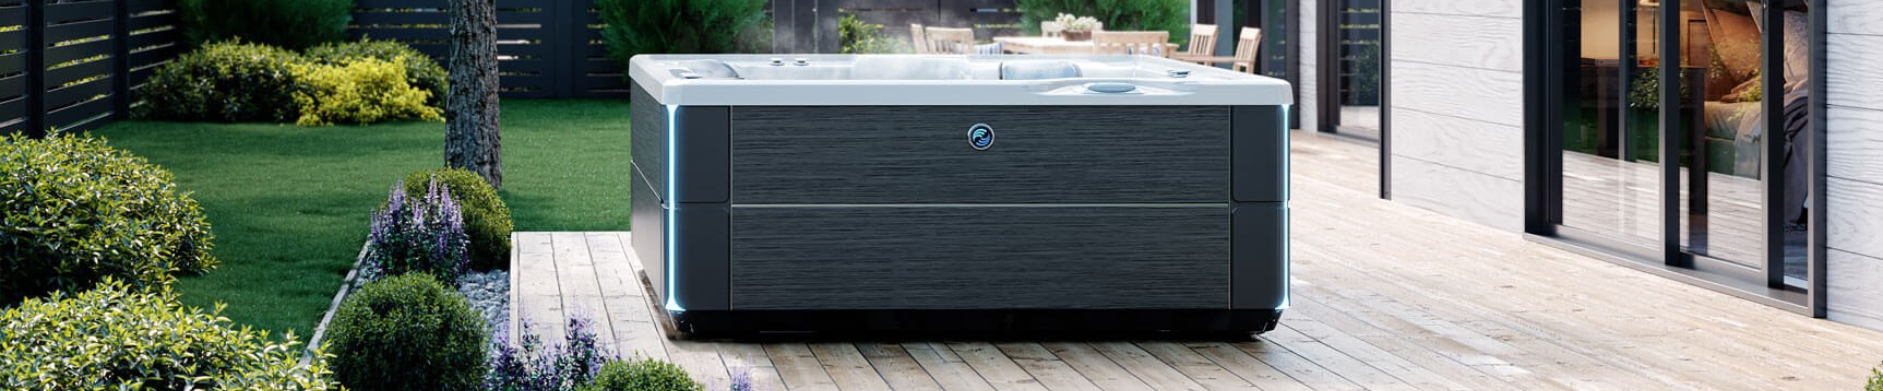 The HotSpring® dealers at Oregon Hot Tub explain Why Salt Water Is Beneficial for Hot Tub Users